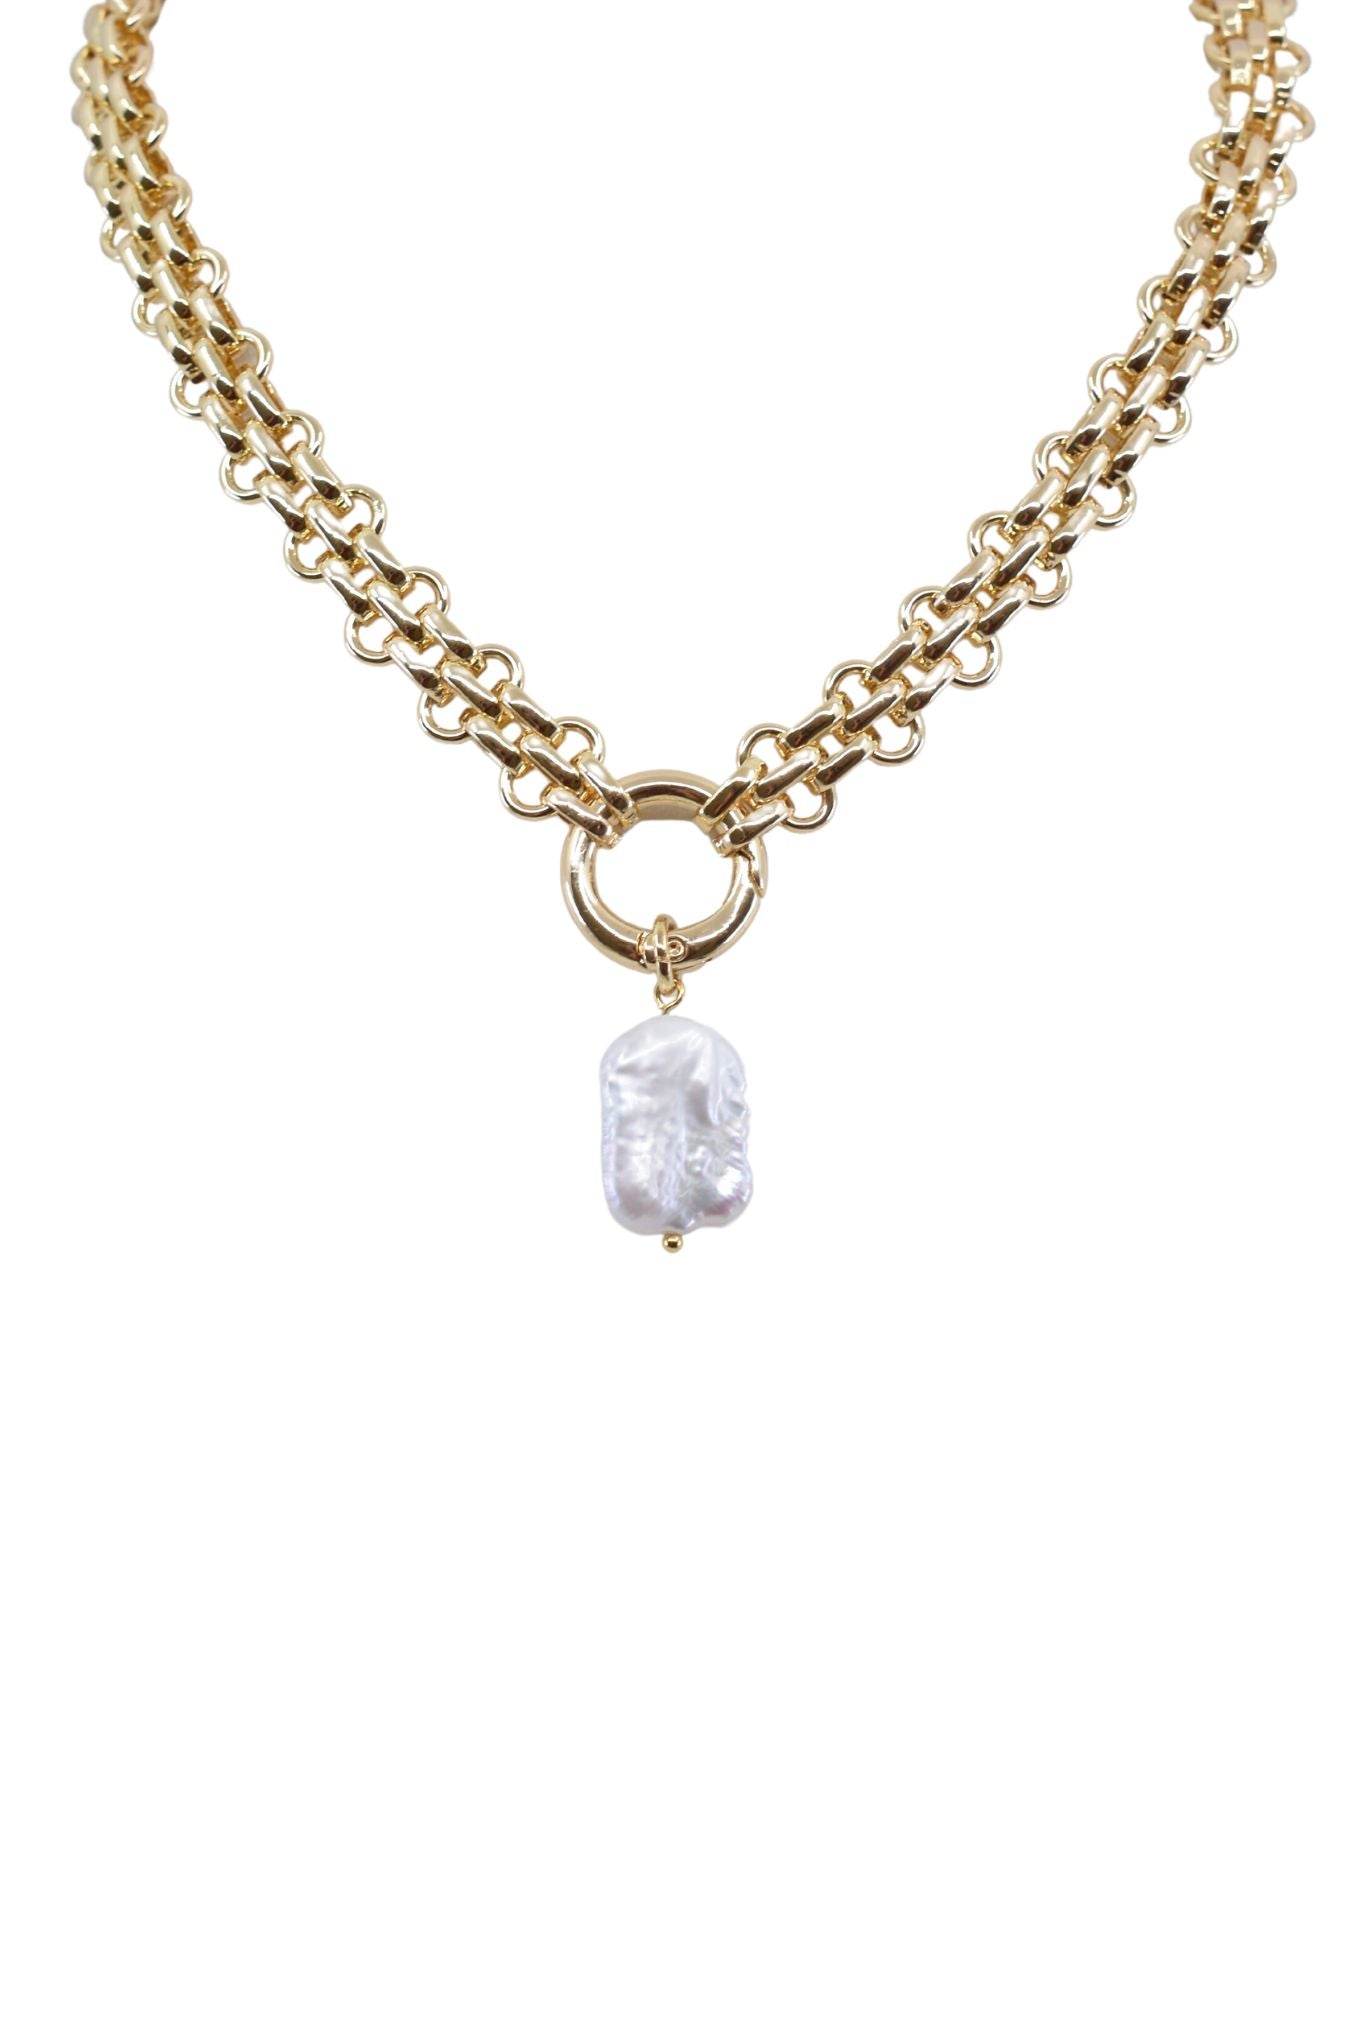 Cuban Choker with Pearl Pendant Necklace - Gold